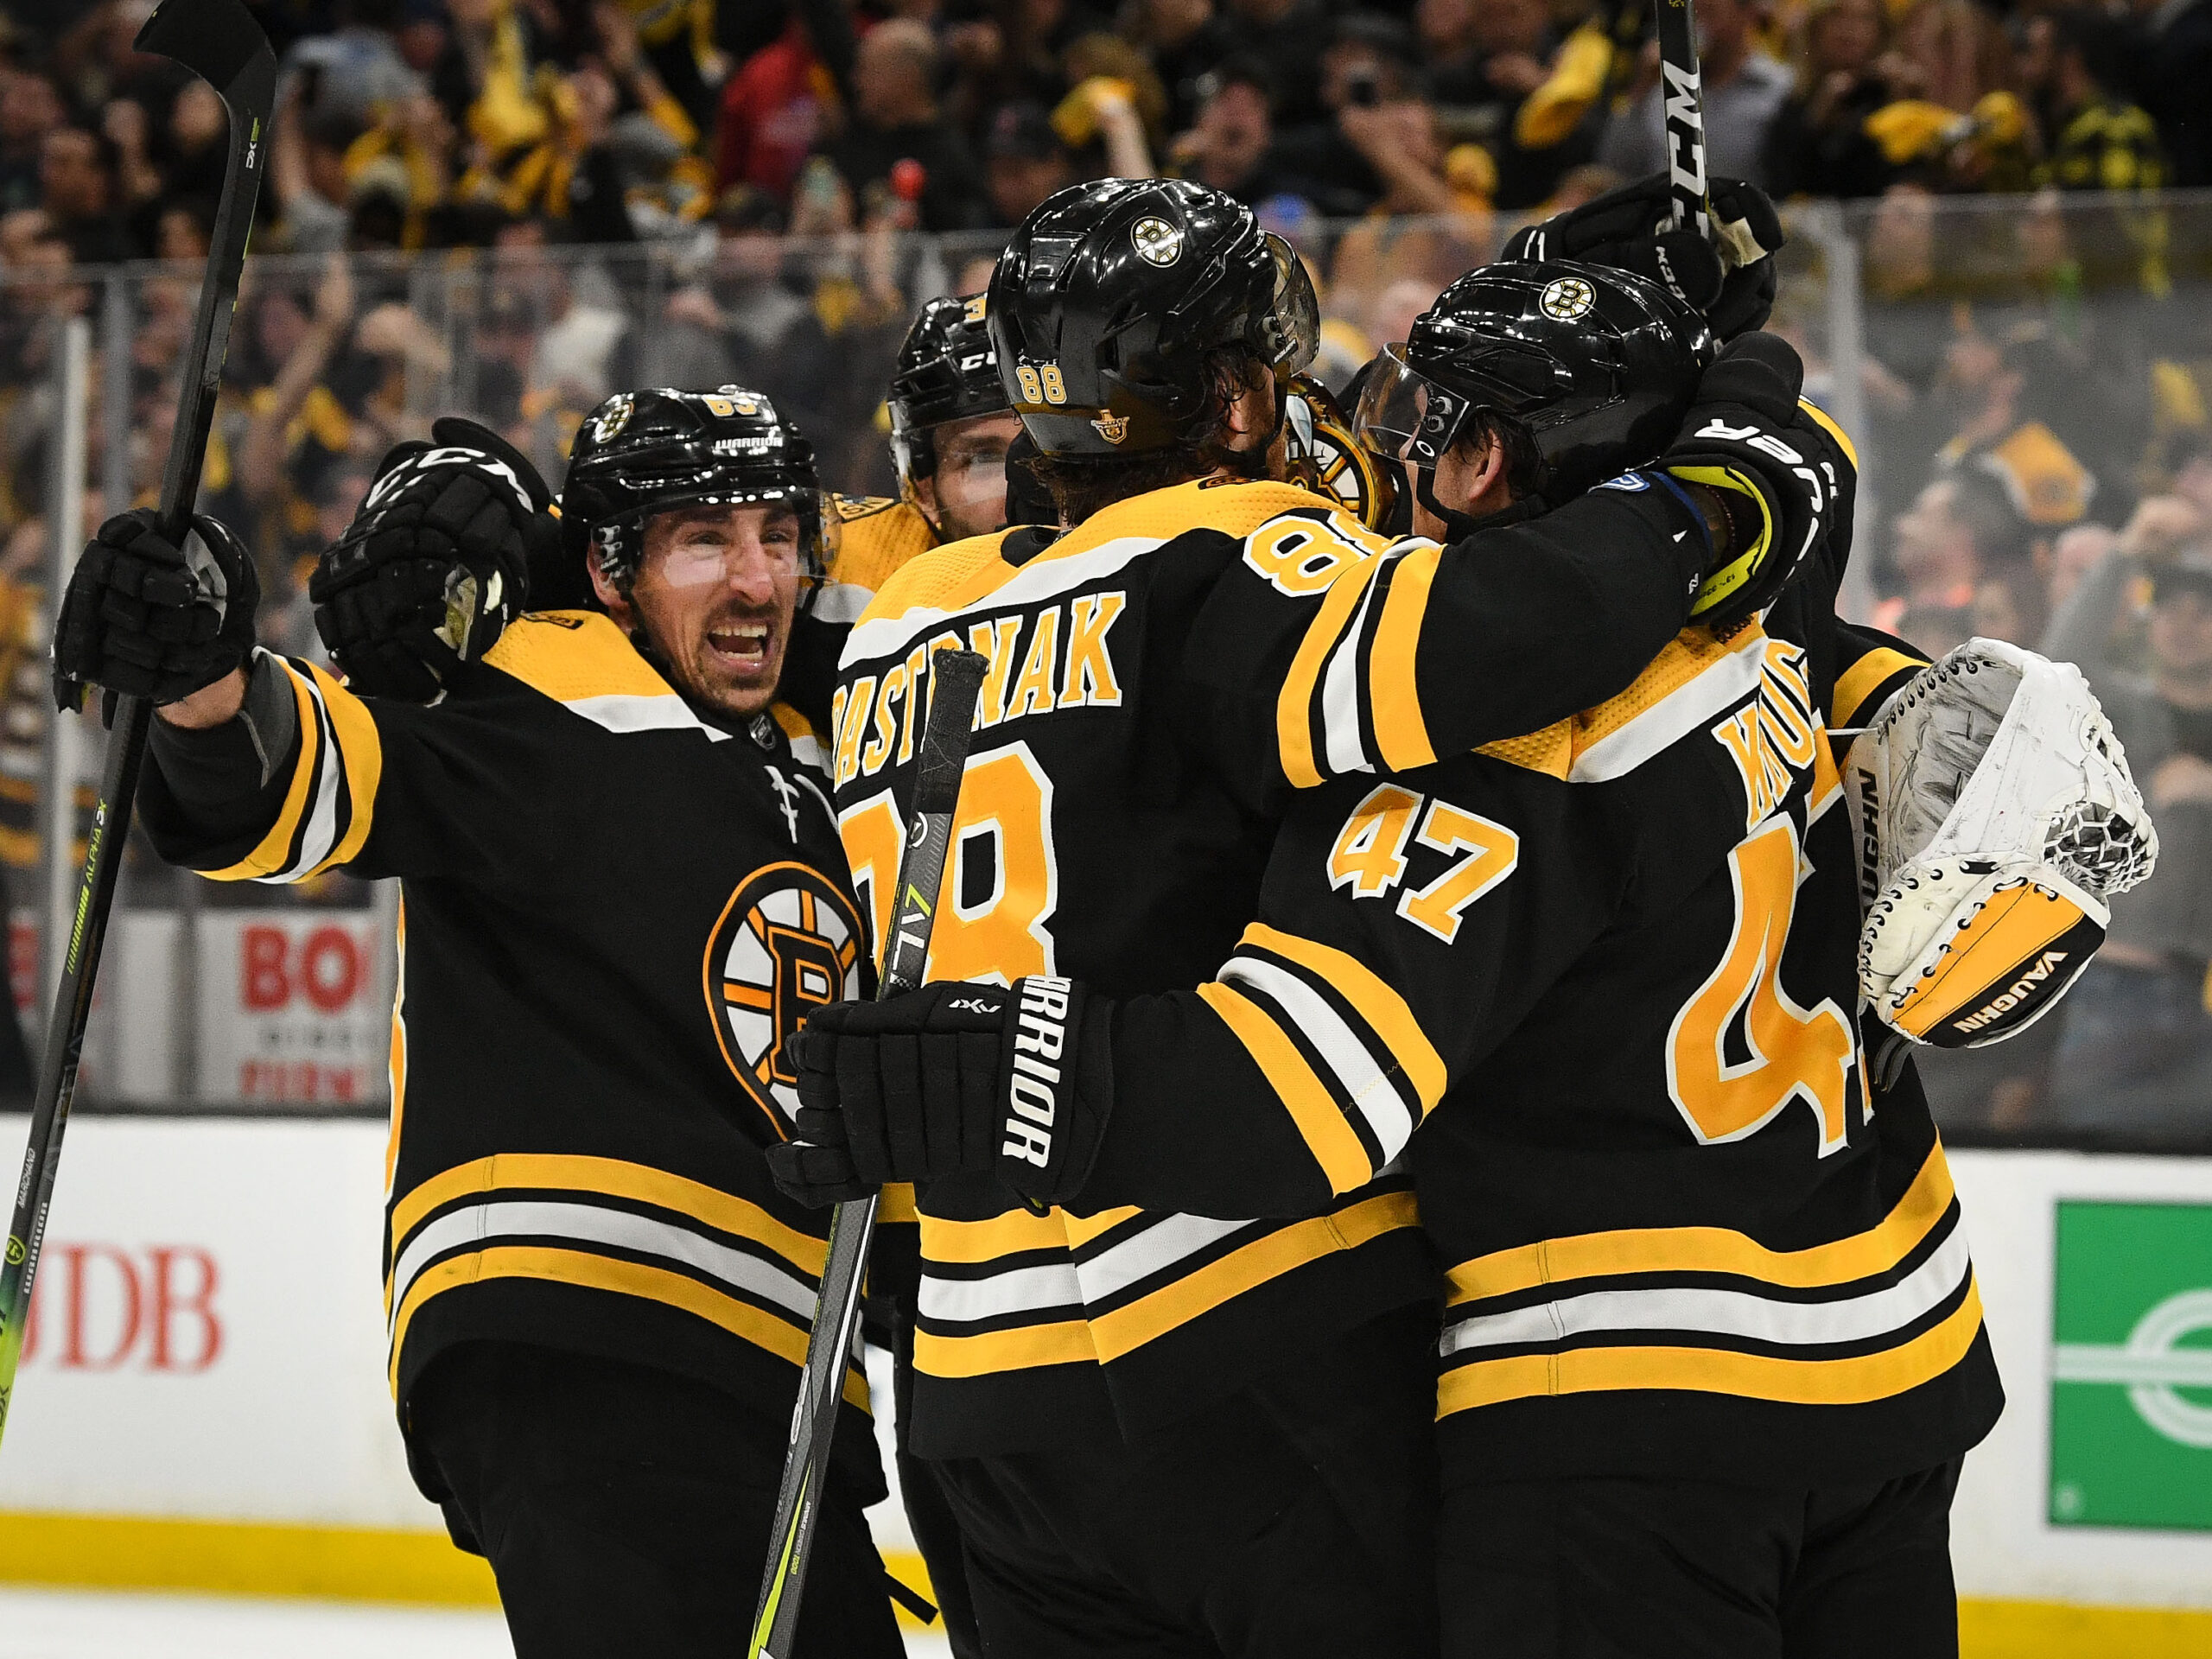 Pastrnak, Rask Give Bruins Life; For Now